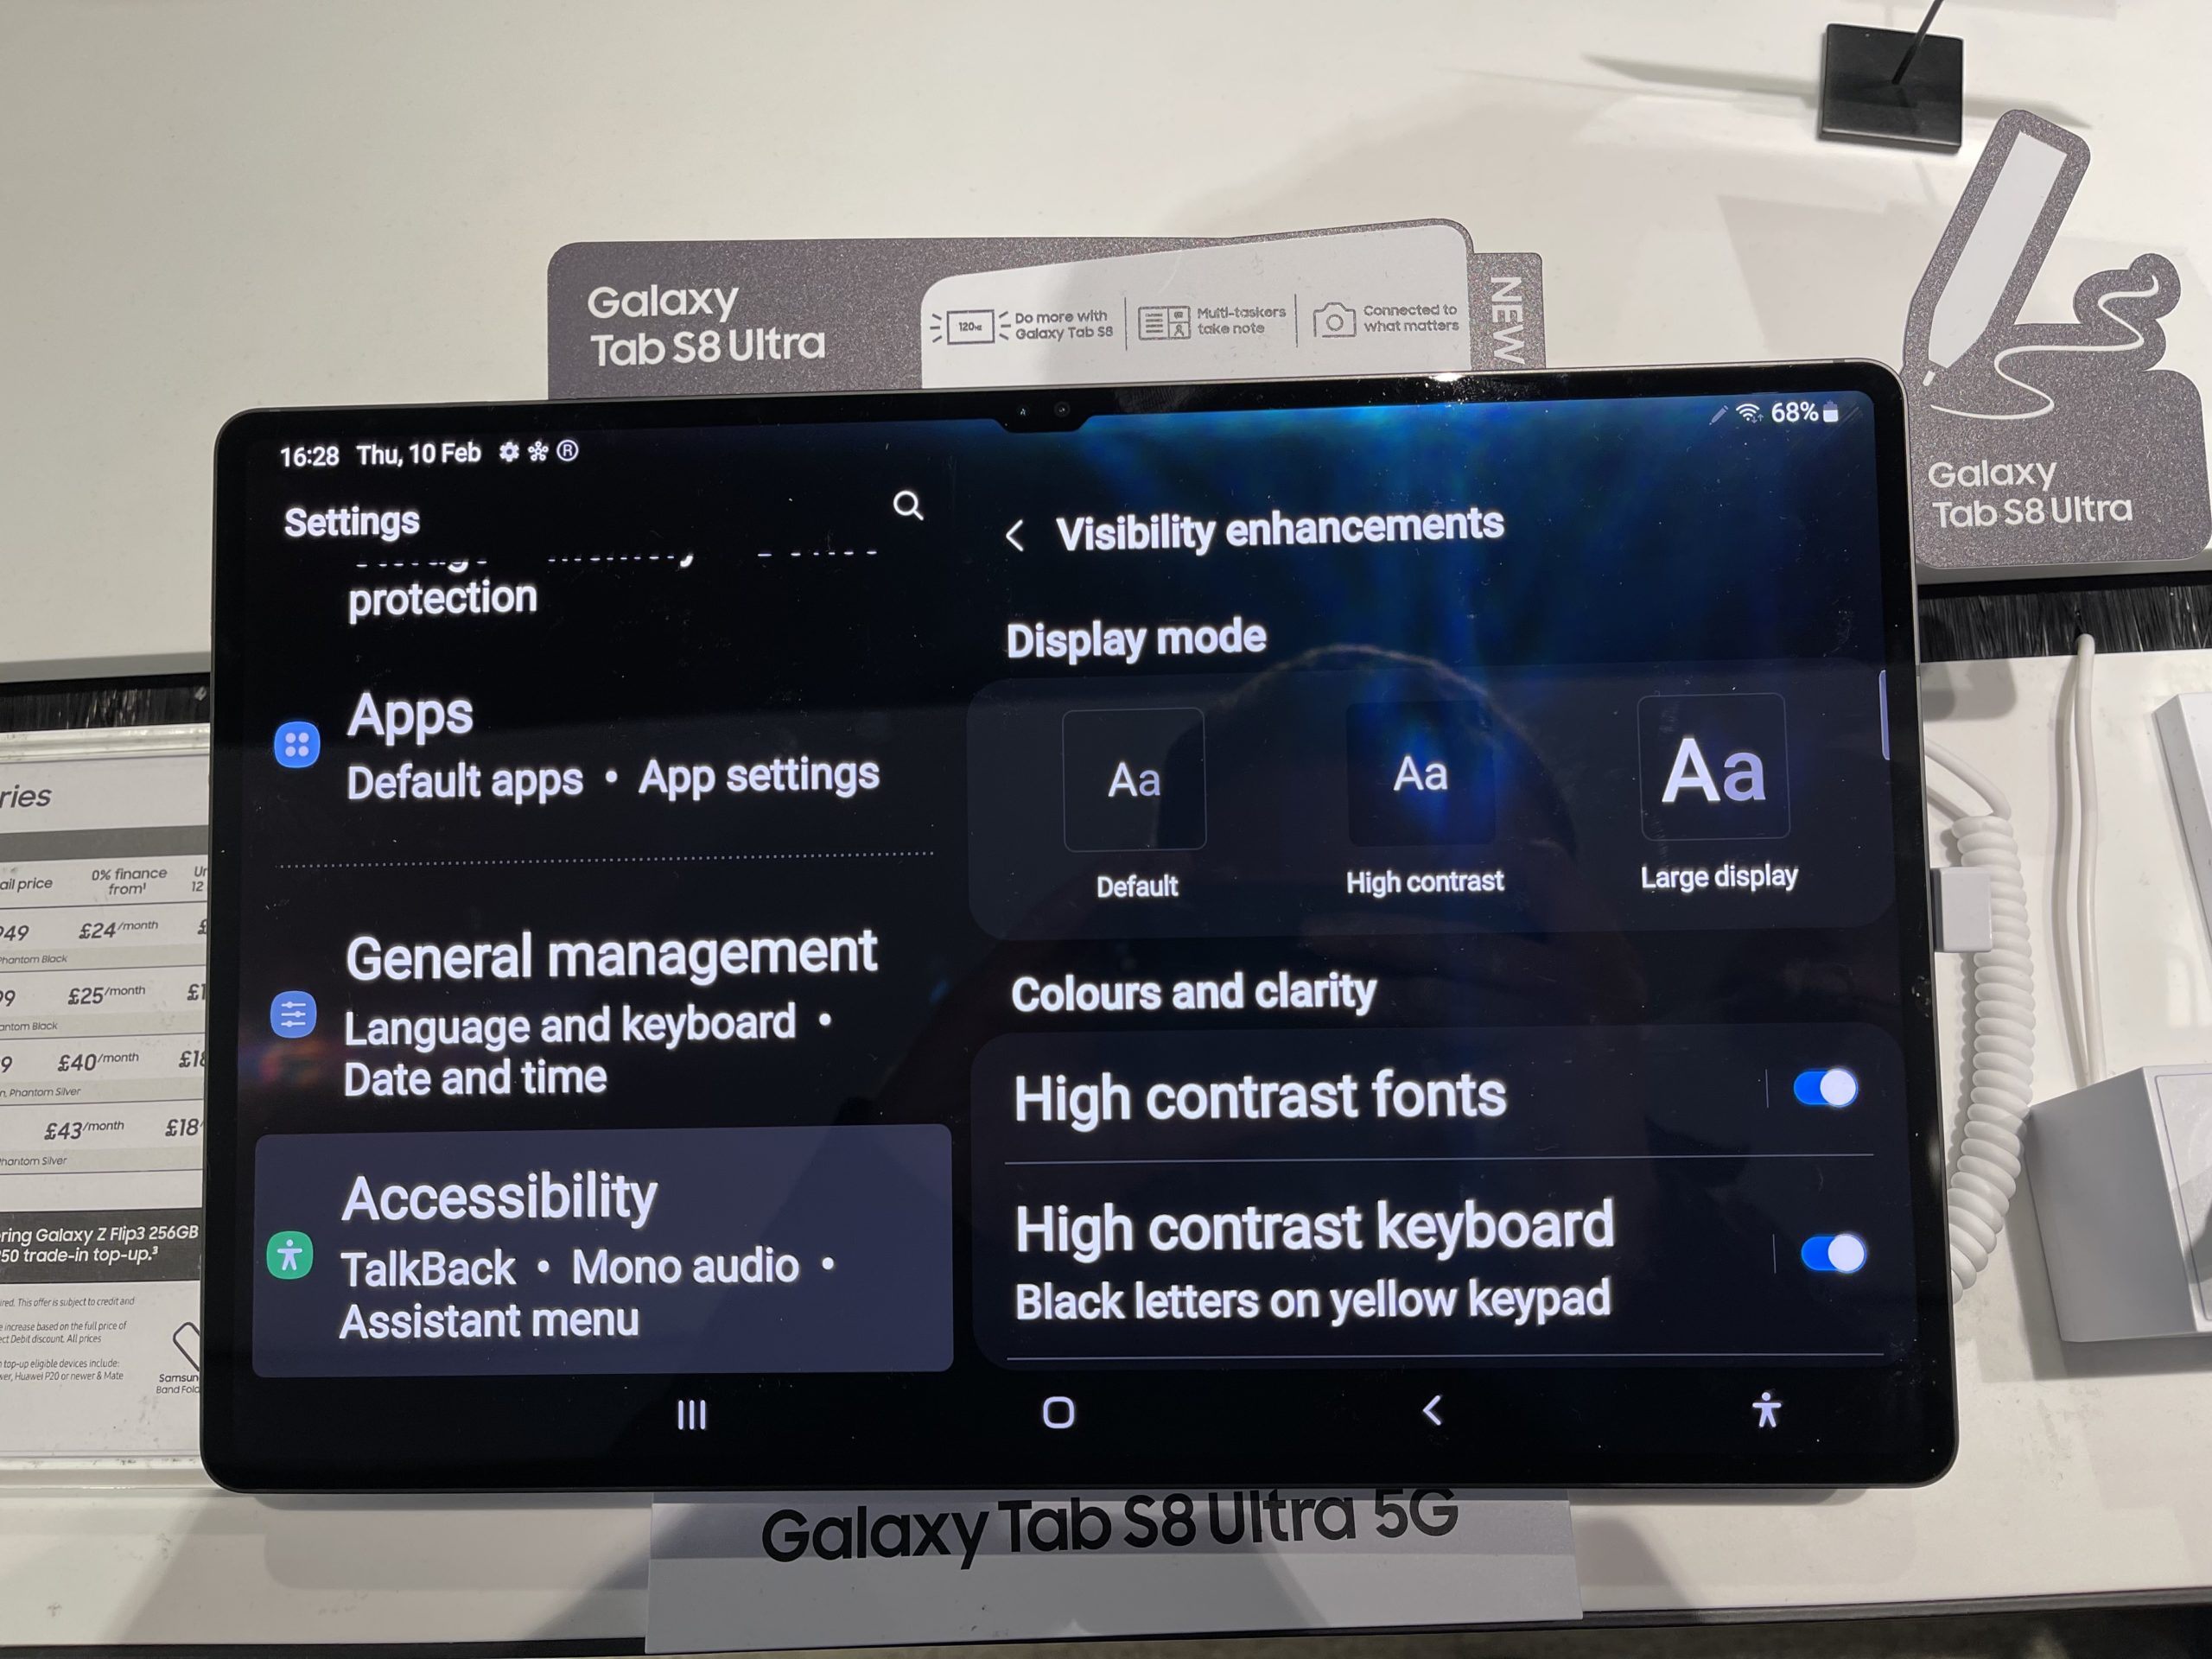 Galaxy Tab S8 visibility enhancements on screen